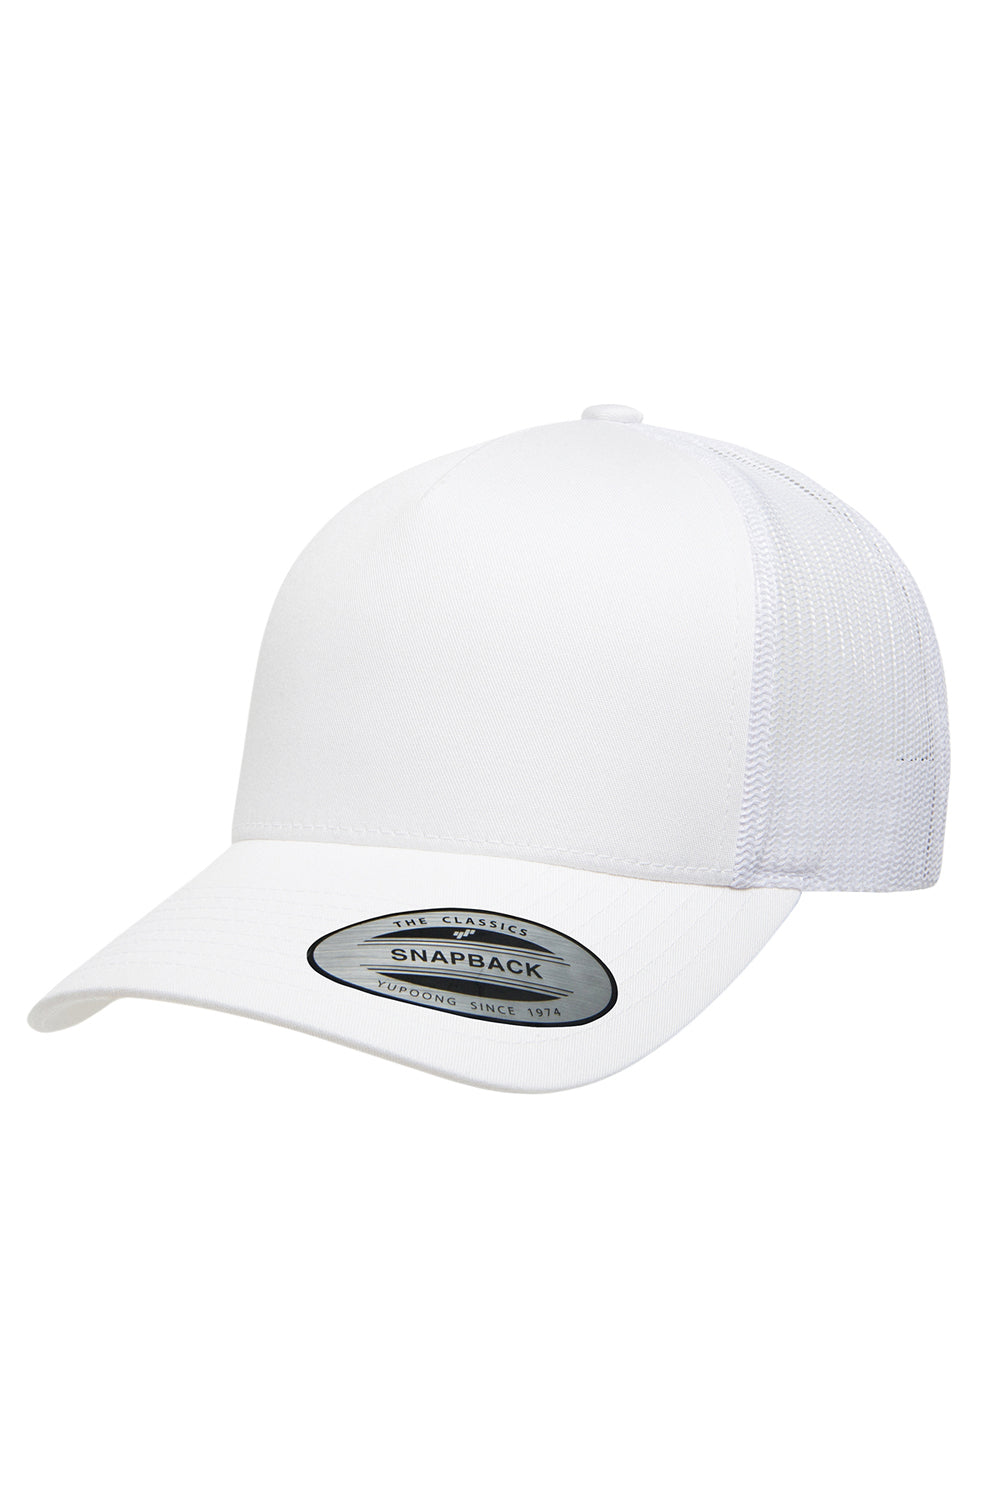 Yupoong 6506 Mens Adjustable Trucker Hat White Front